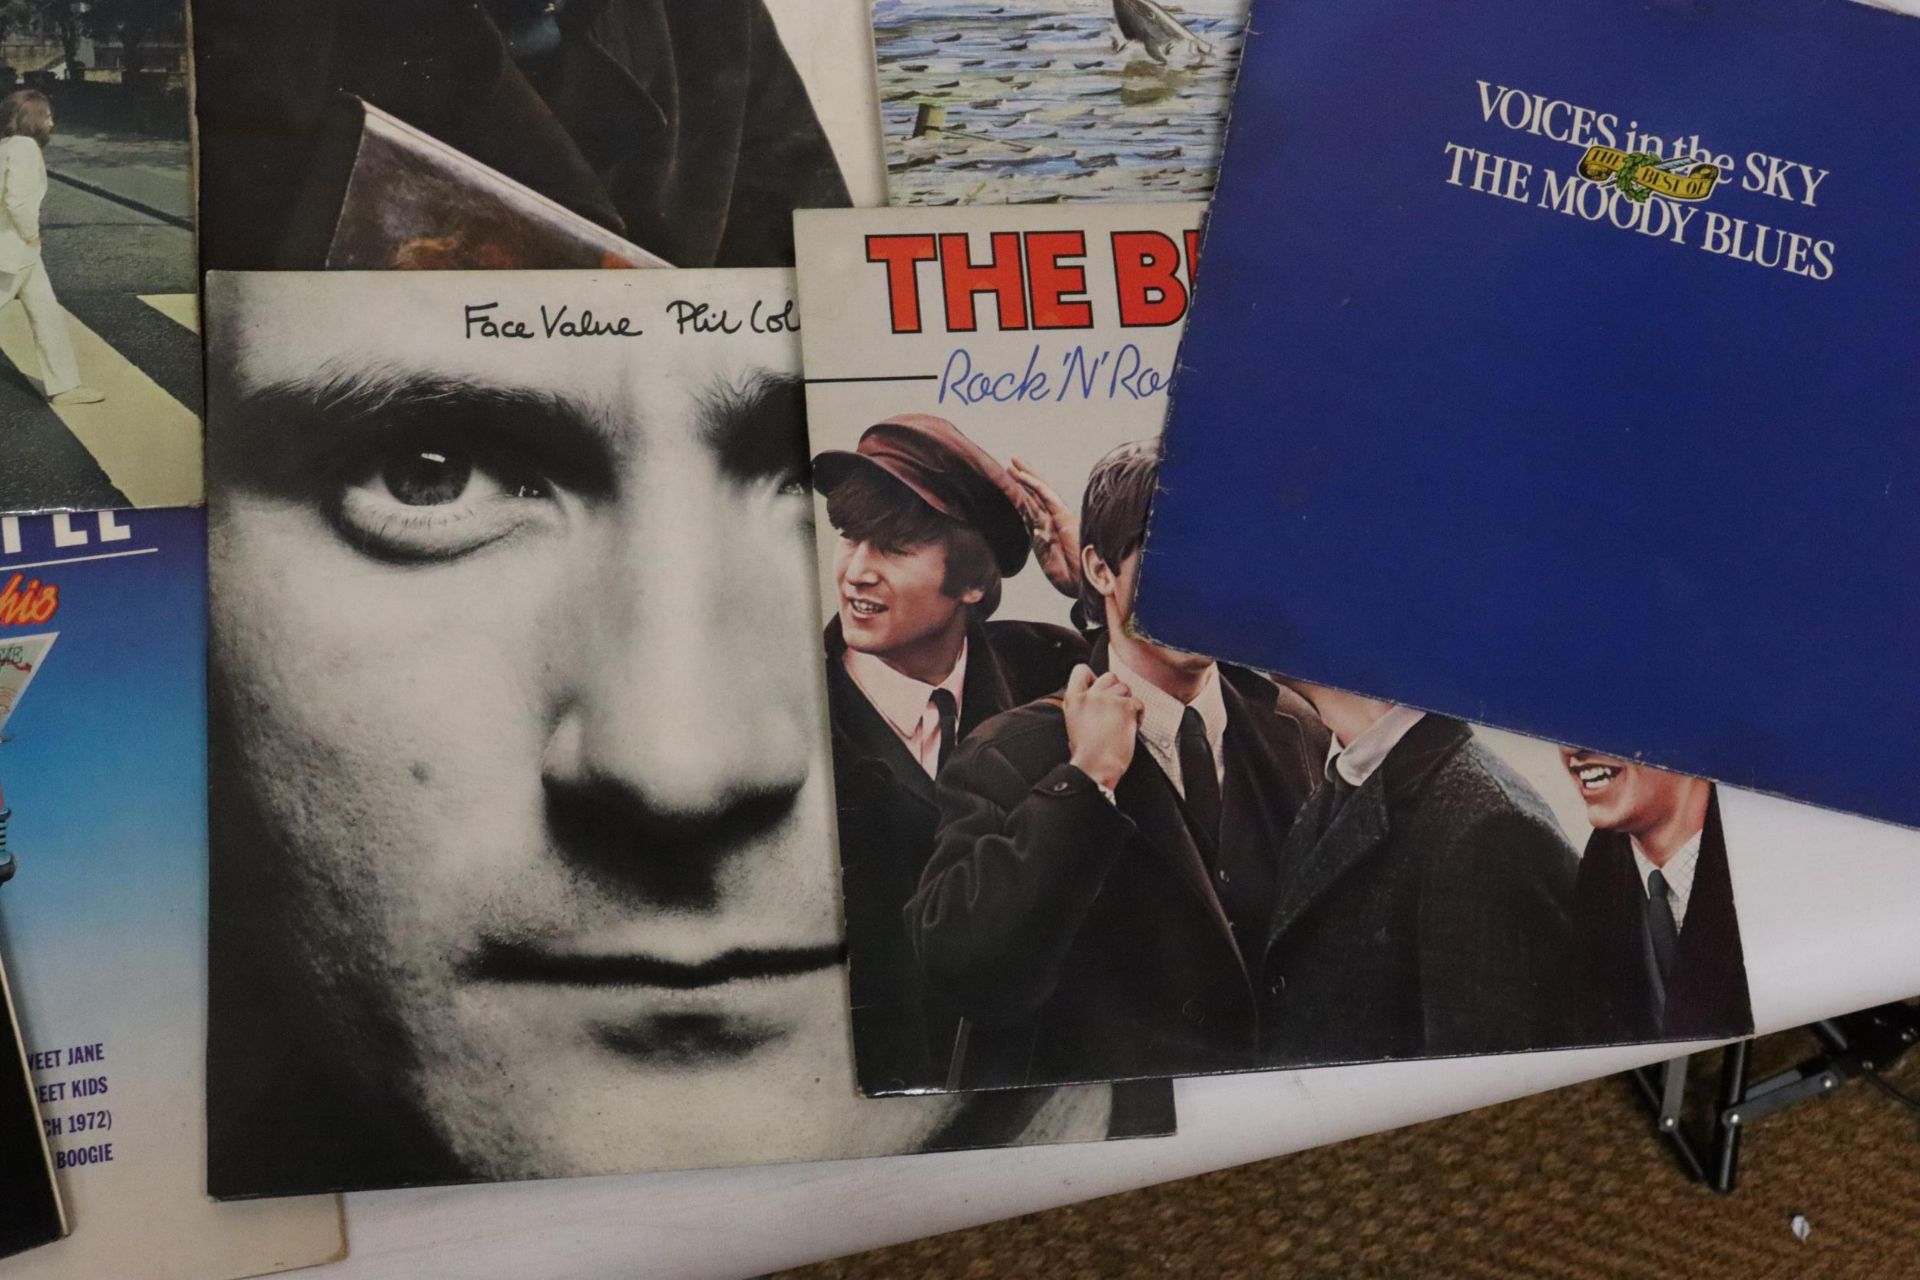 A COLLECTION OF VINYL LP RECORDS TO INCLUDE GENESIS, FOXTROT, THE BEATLES, ABBEY ROAD, BOB DYLAN, - Image 5 of 5